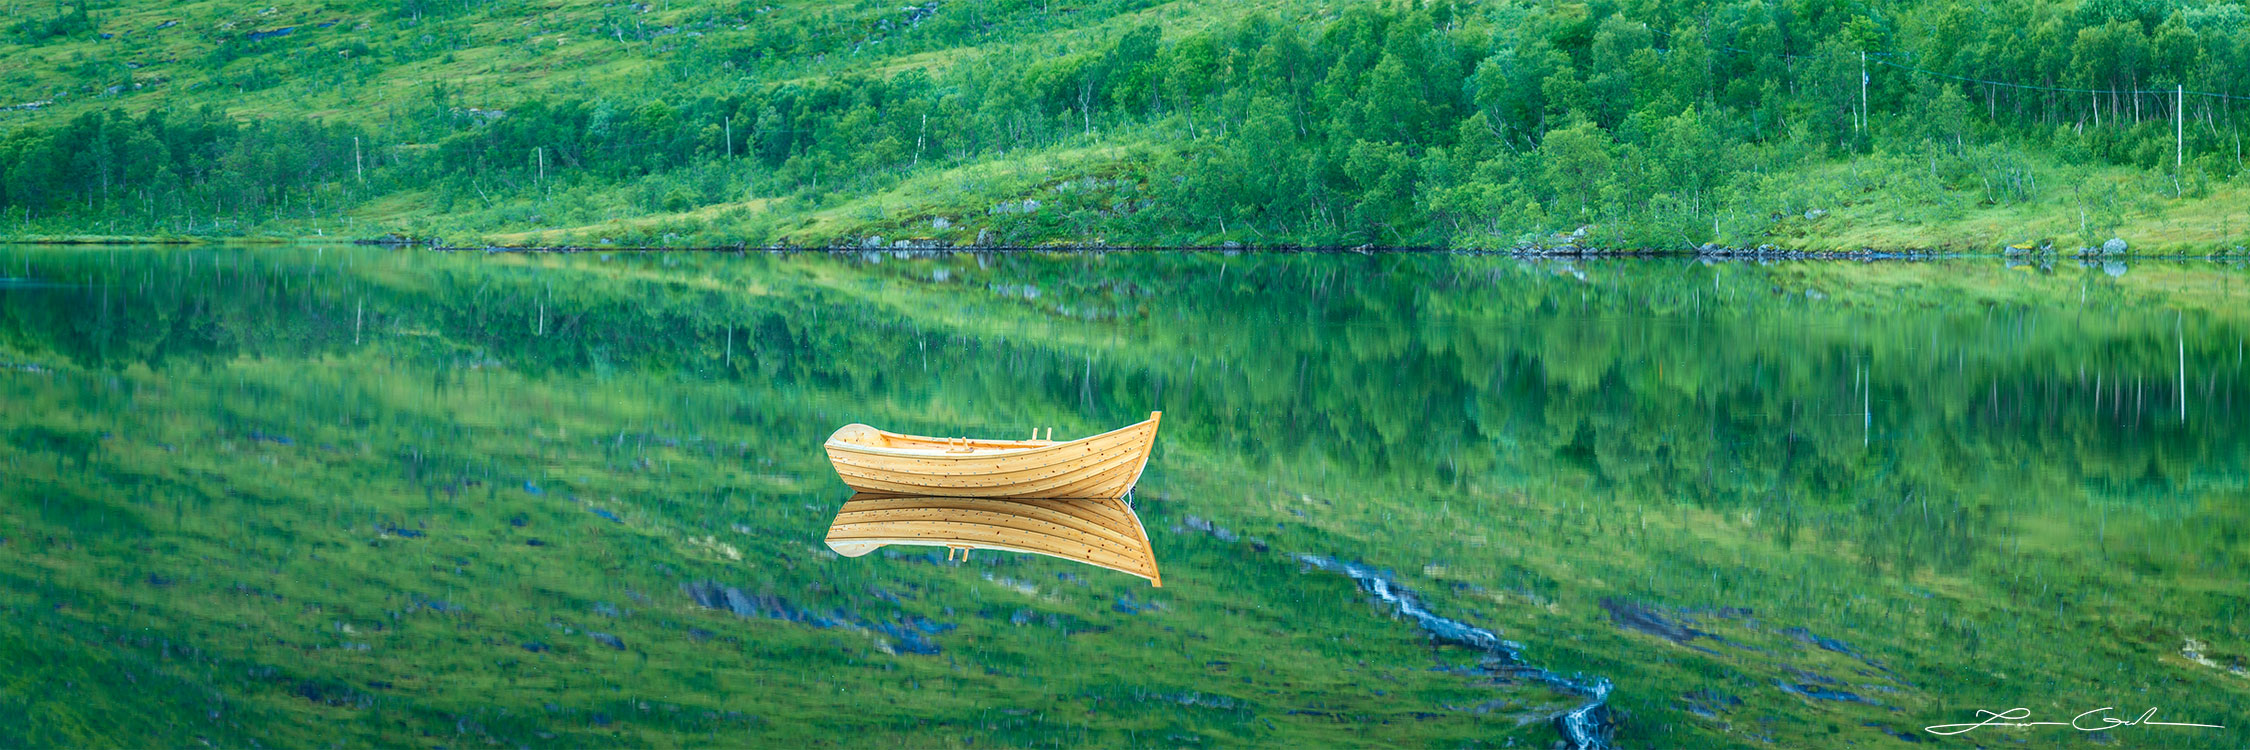 A handcrafted beautiful boat reflection in a calm lake in Senja, Norway - Gintchin Fine Art